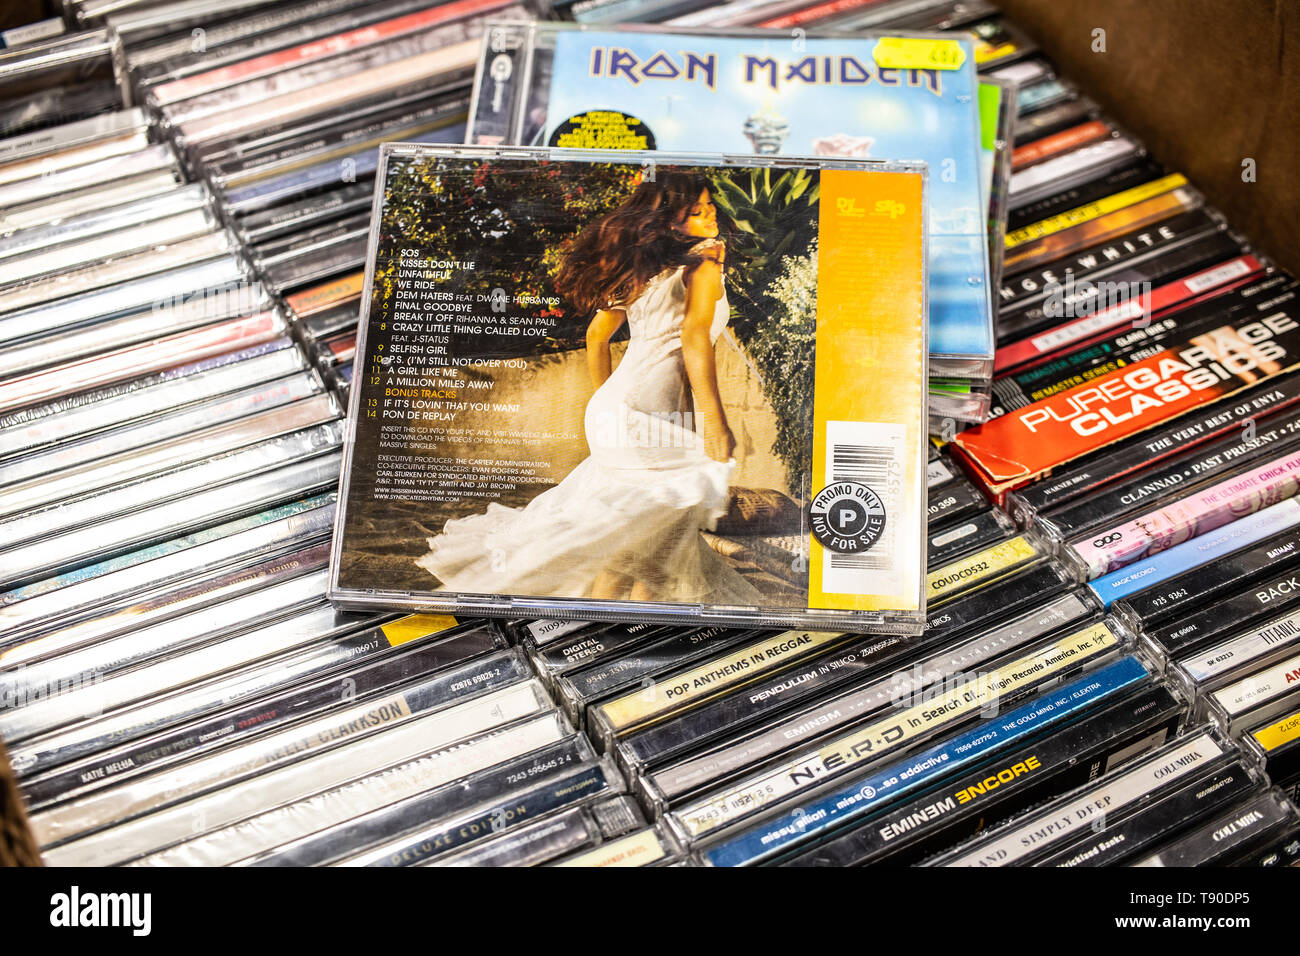 Nadarzyn, Poland, May 11, 2019: Rihanna CD album A Girl like Me 2006 on display for sale, famous Barbadian singer, businesswoman and actress, Stock Photo